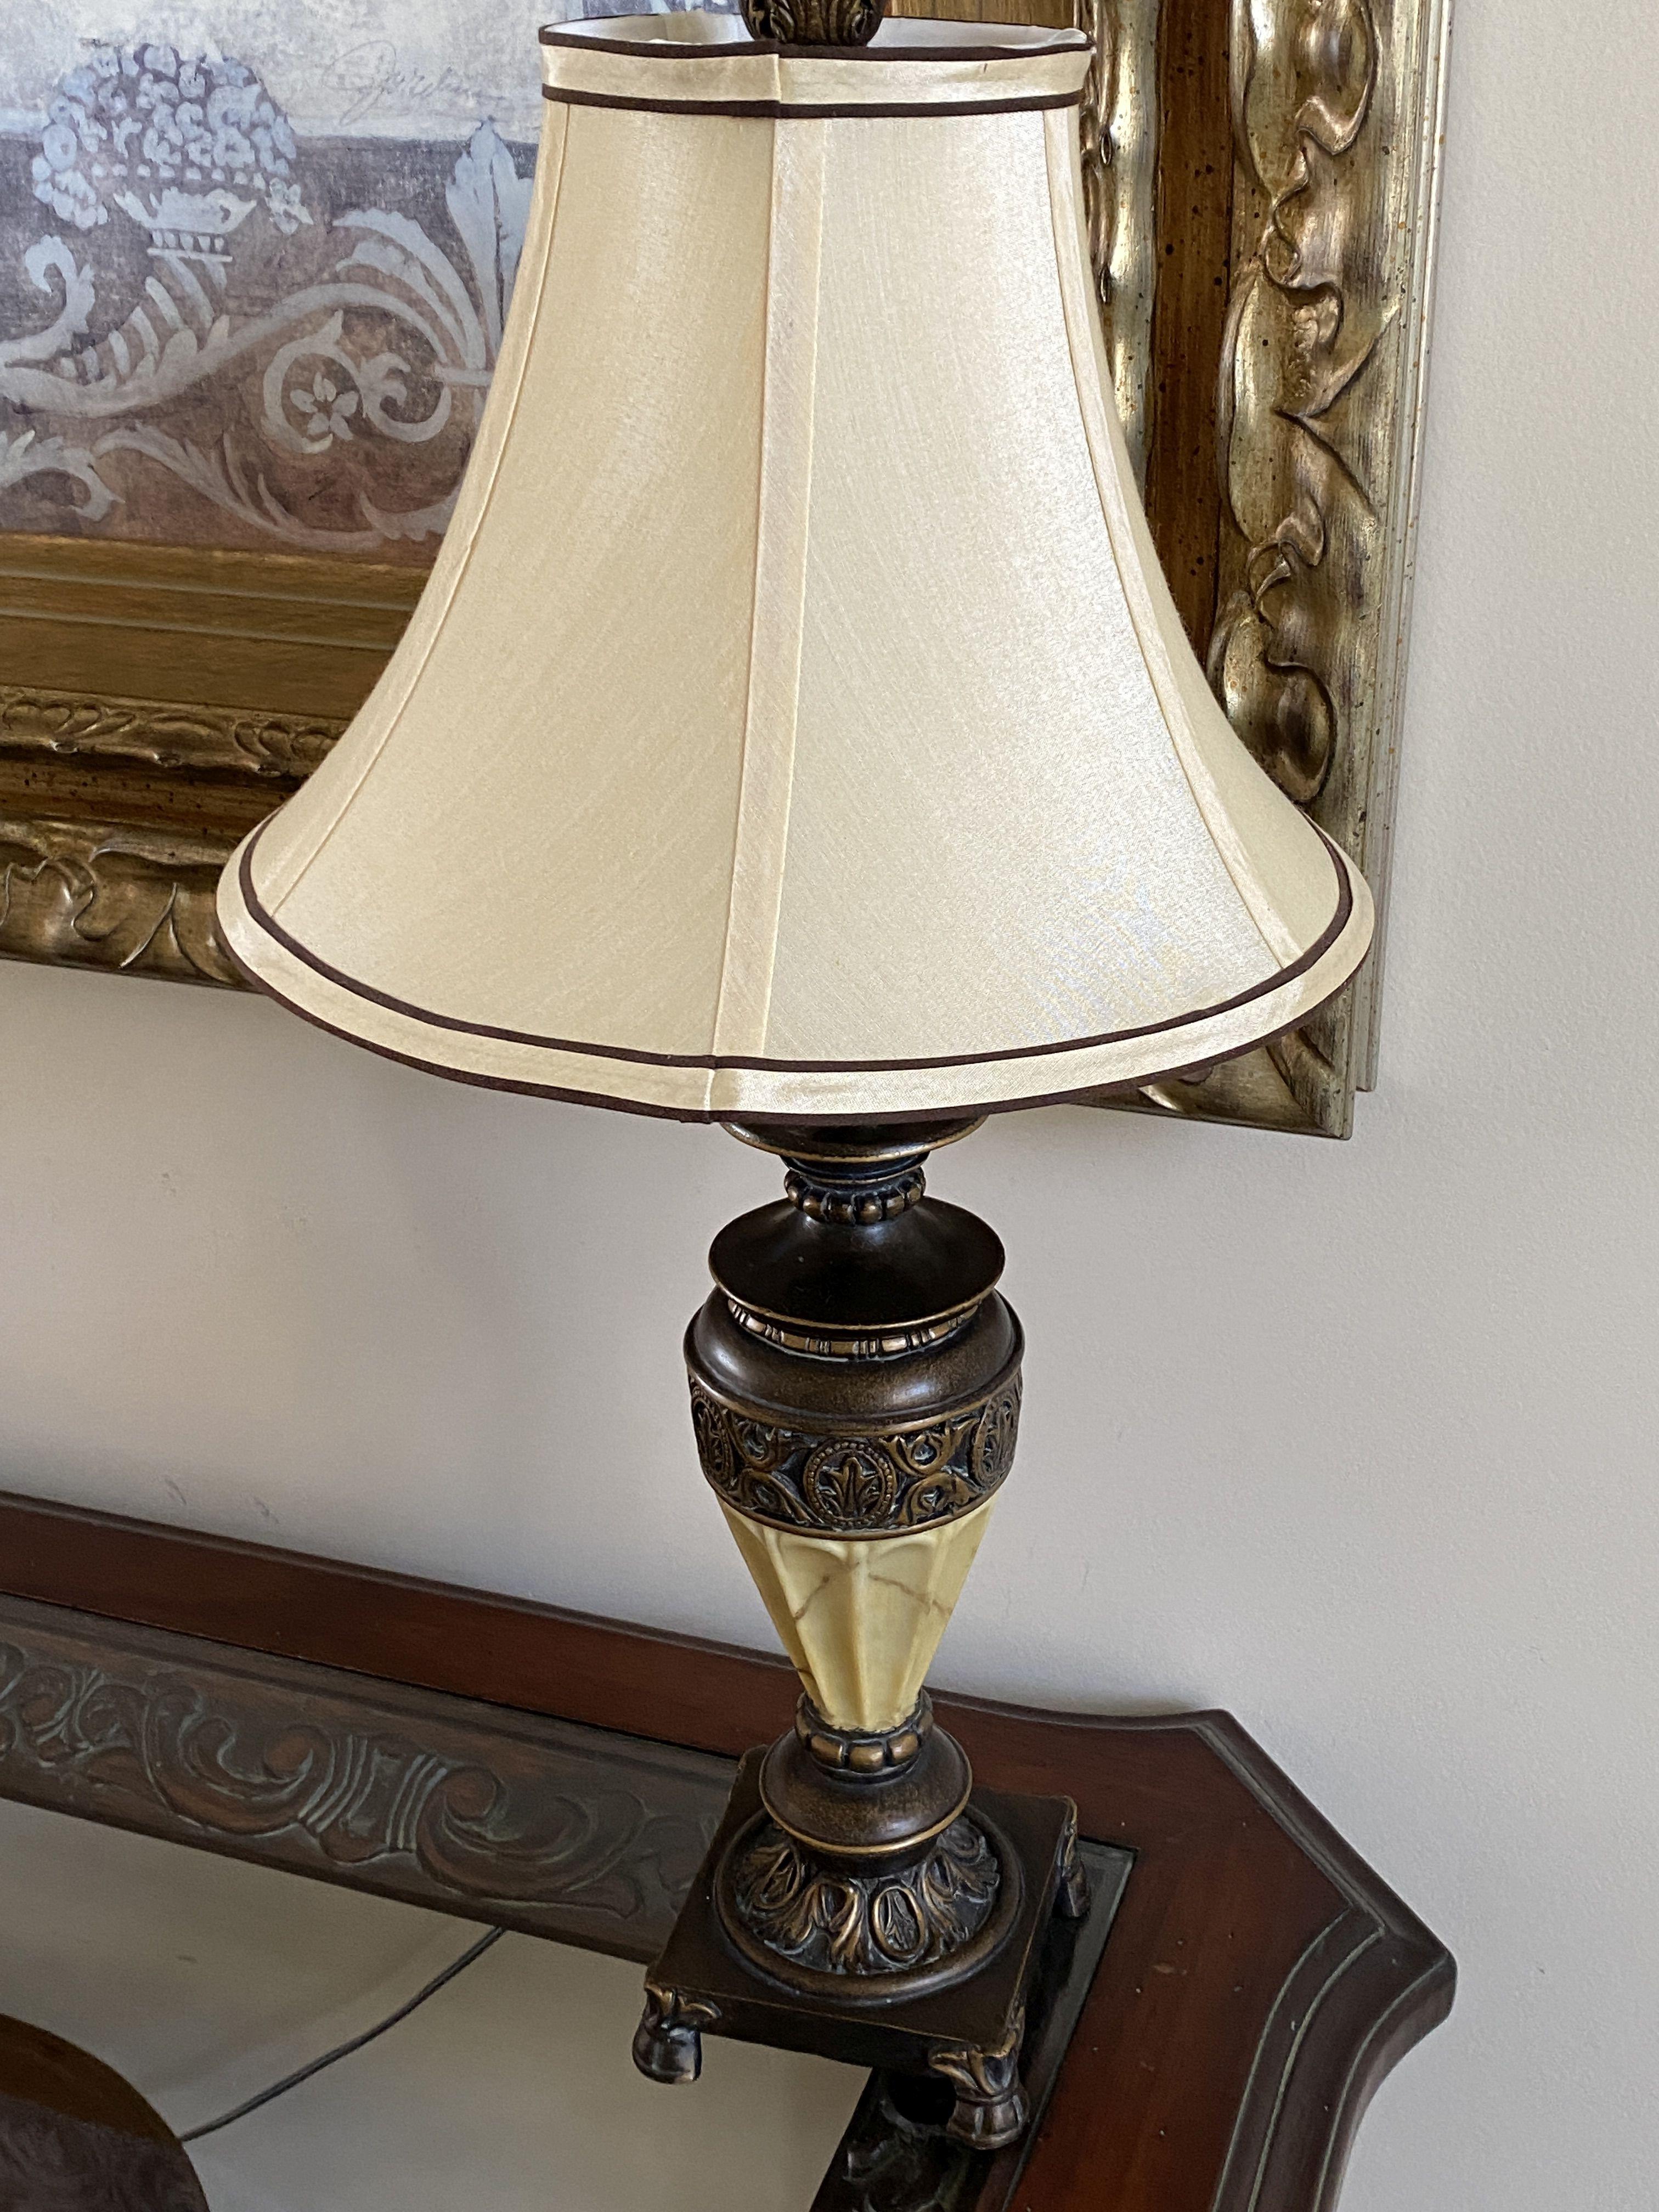 Pair of 26" Decorative Table Lamps with Shade